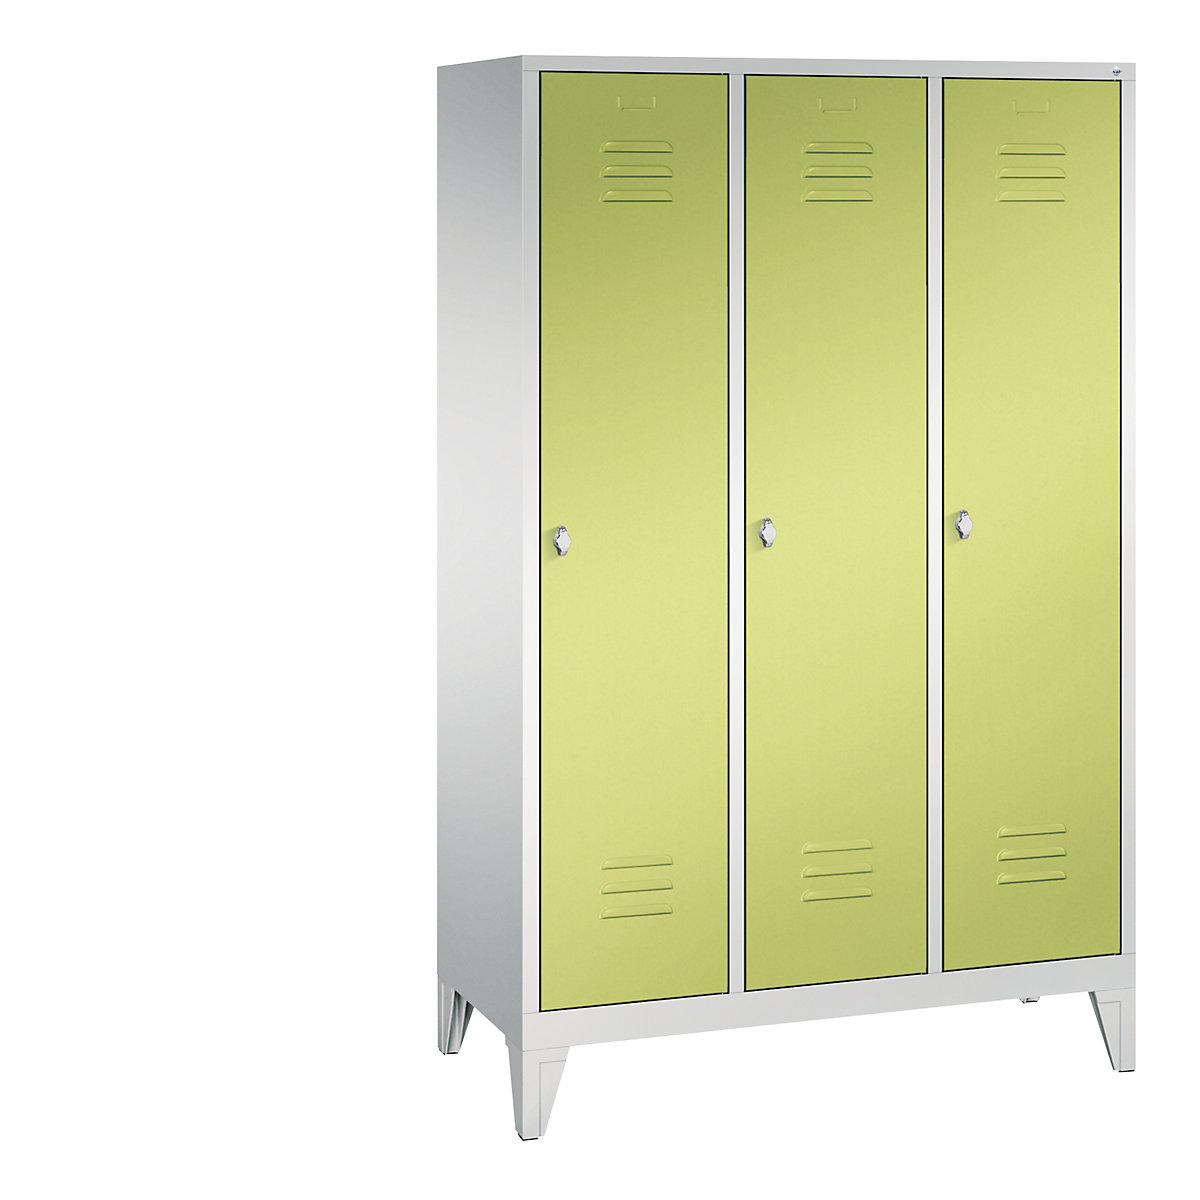 CLASSIC cloakroom locker with feet – C+P, 3 compartments, compartment width 400 mm, light grey / viridian green-7